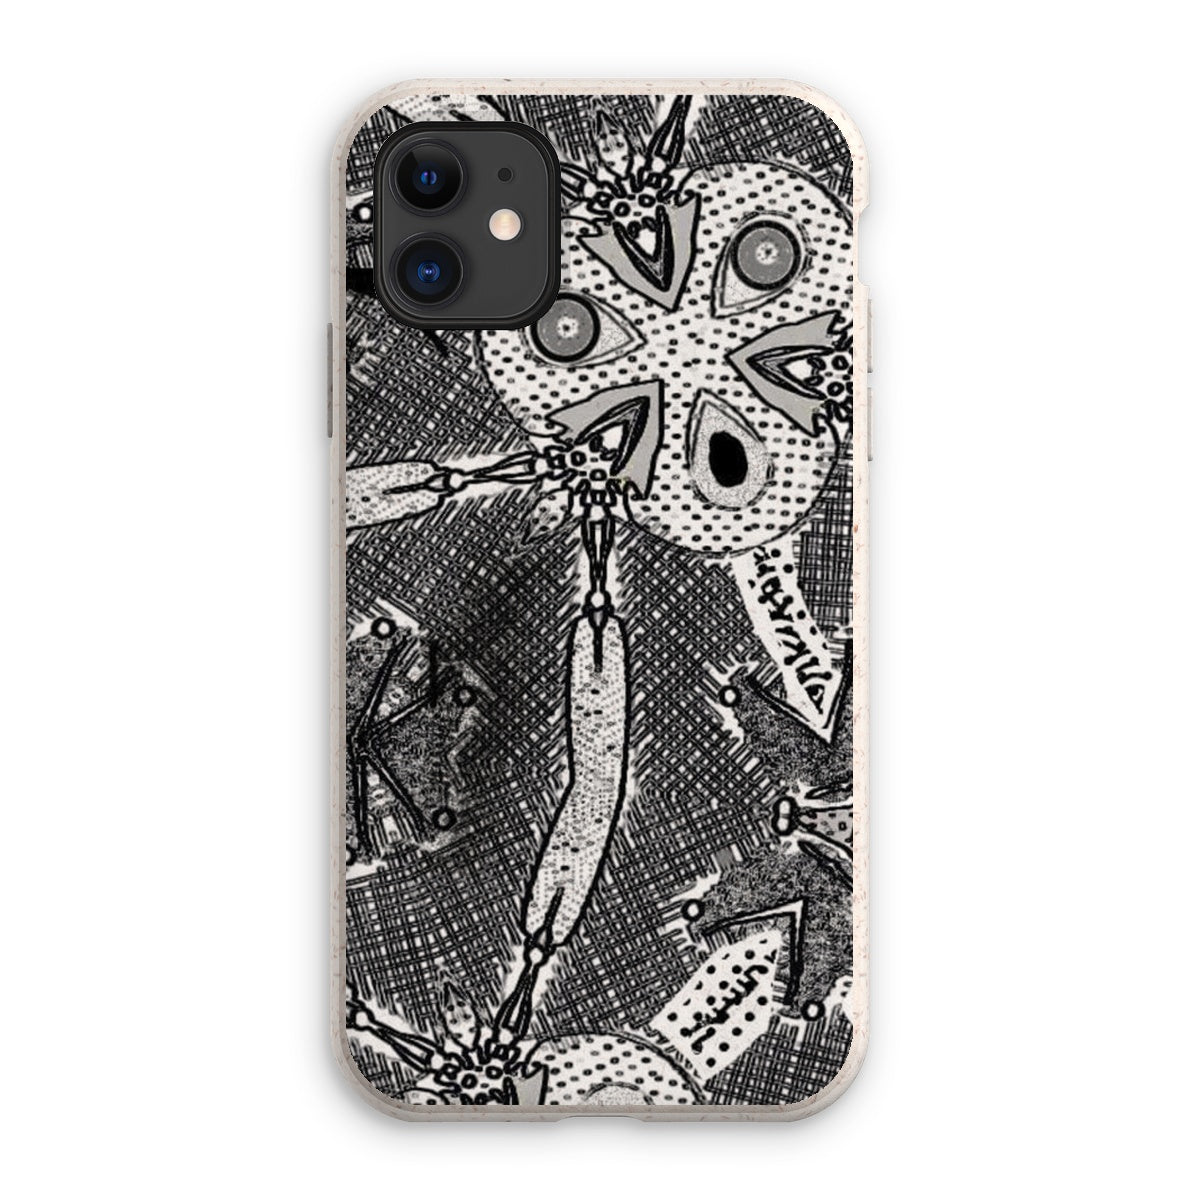 Snakes Eco Phone Case